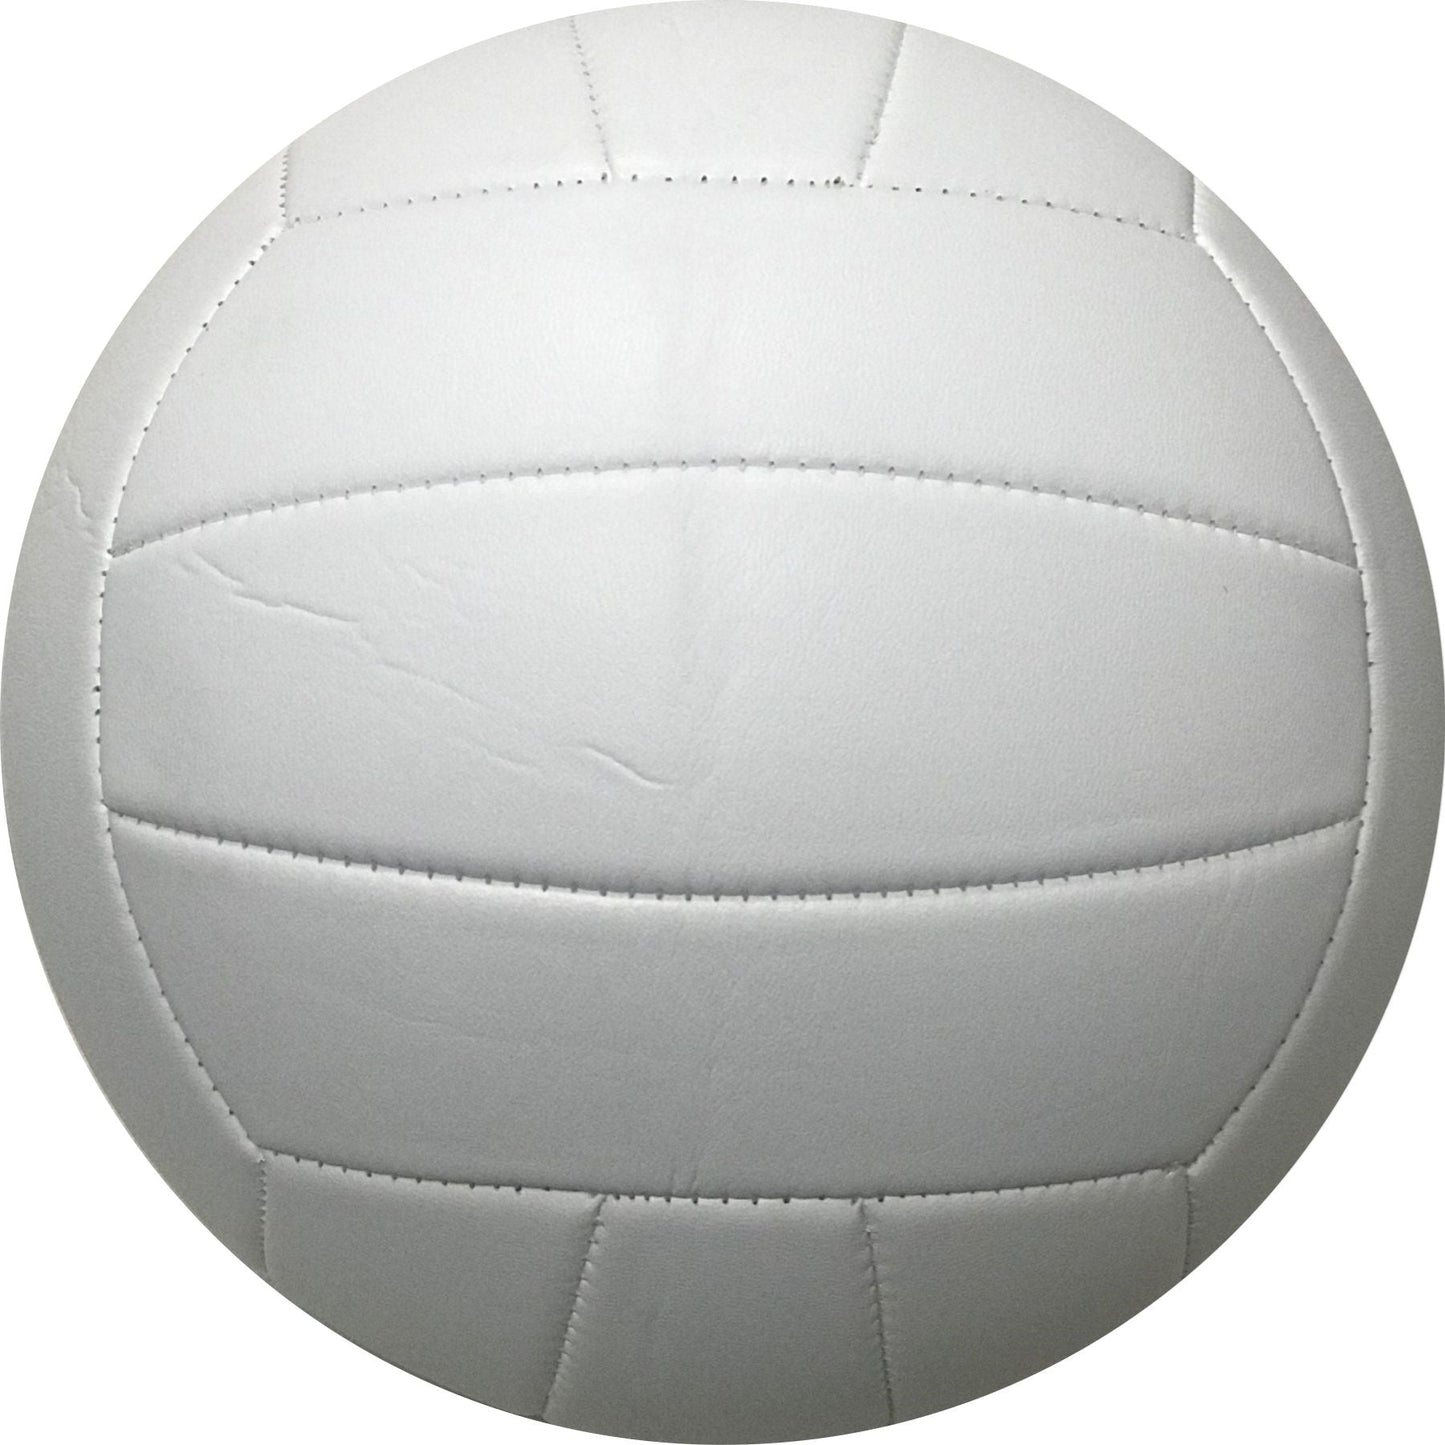 All White Volleyball Ball Without Any Imprint for Autograph Awards Sign Painting Coaches Gift - Pack of Six Balls